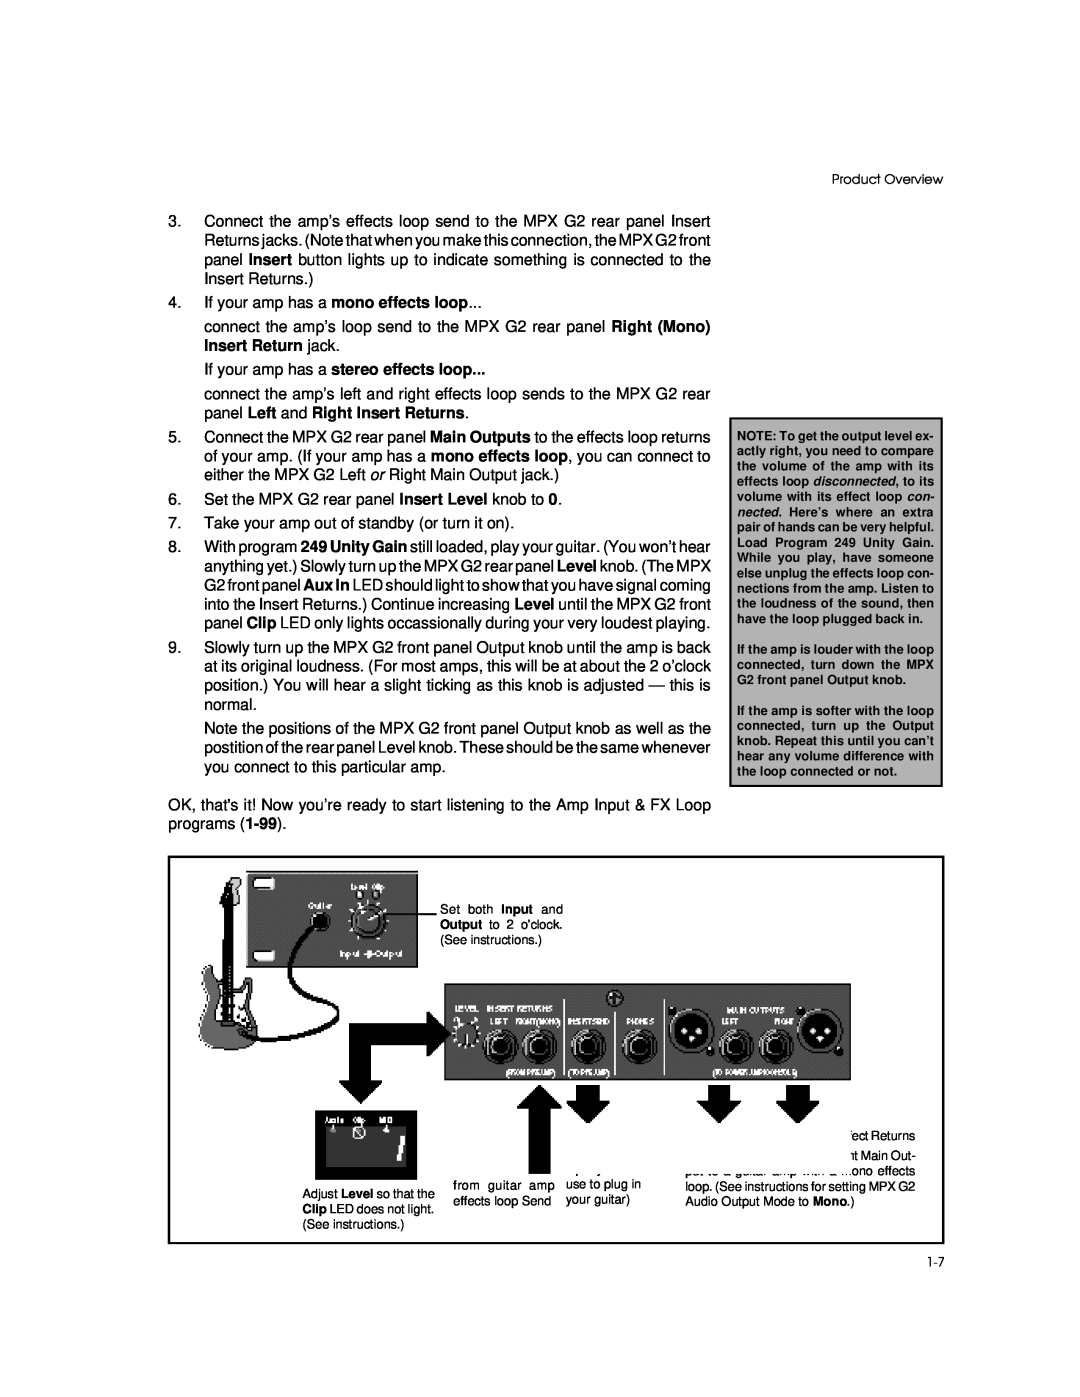 Lexicon MPX G2 manual If your amp has a stereo effects loop 